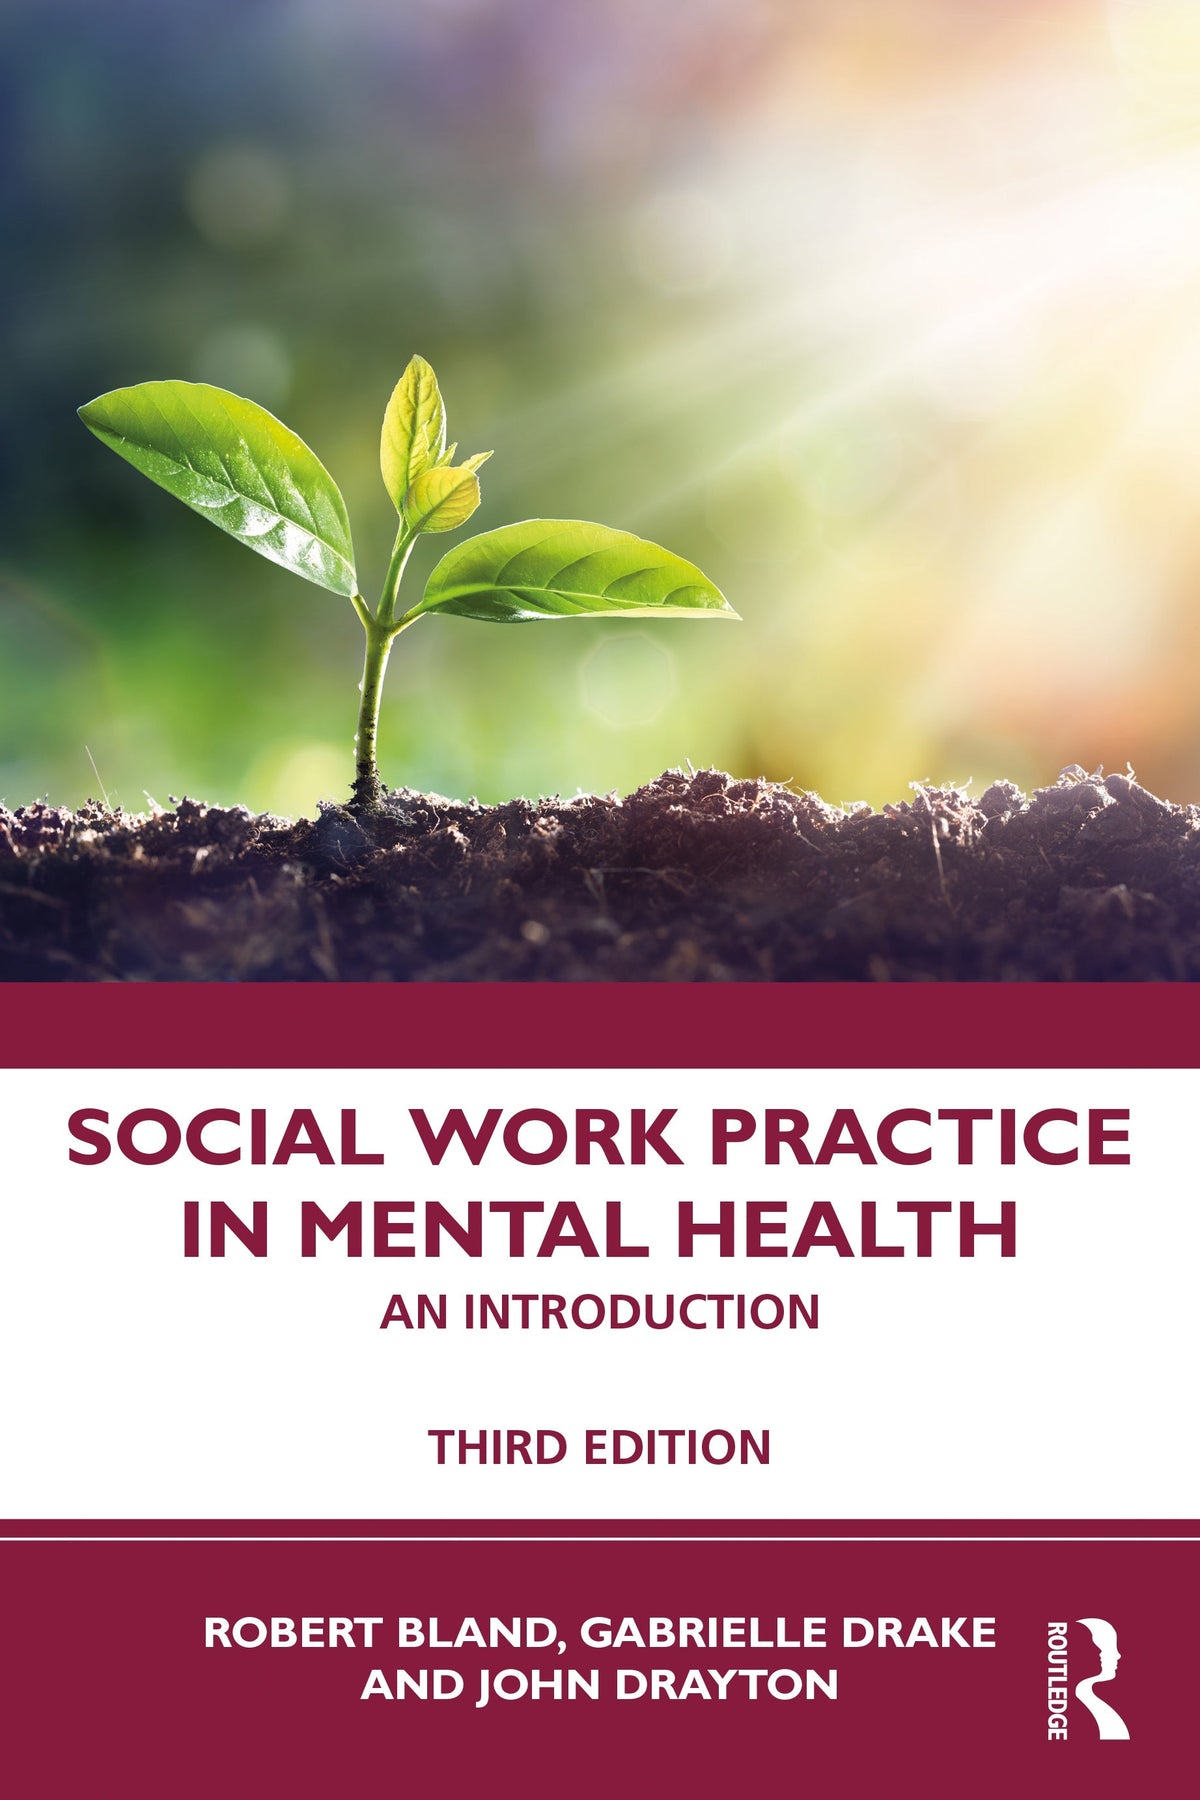 SOCIAL WORK PRACTICE IN MENTAL HEALTH AN INTRODUCTION eBOOK